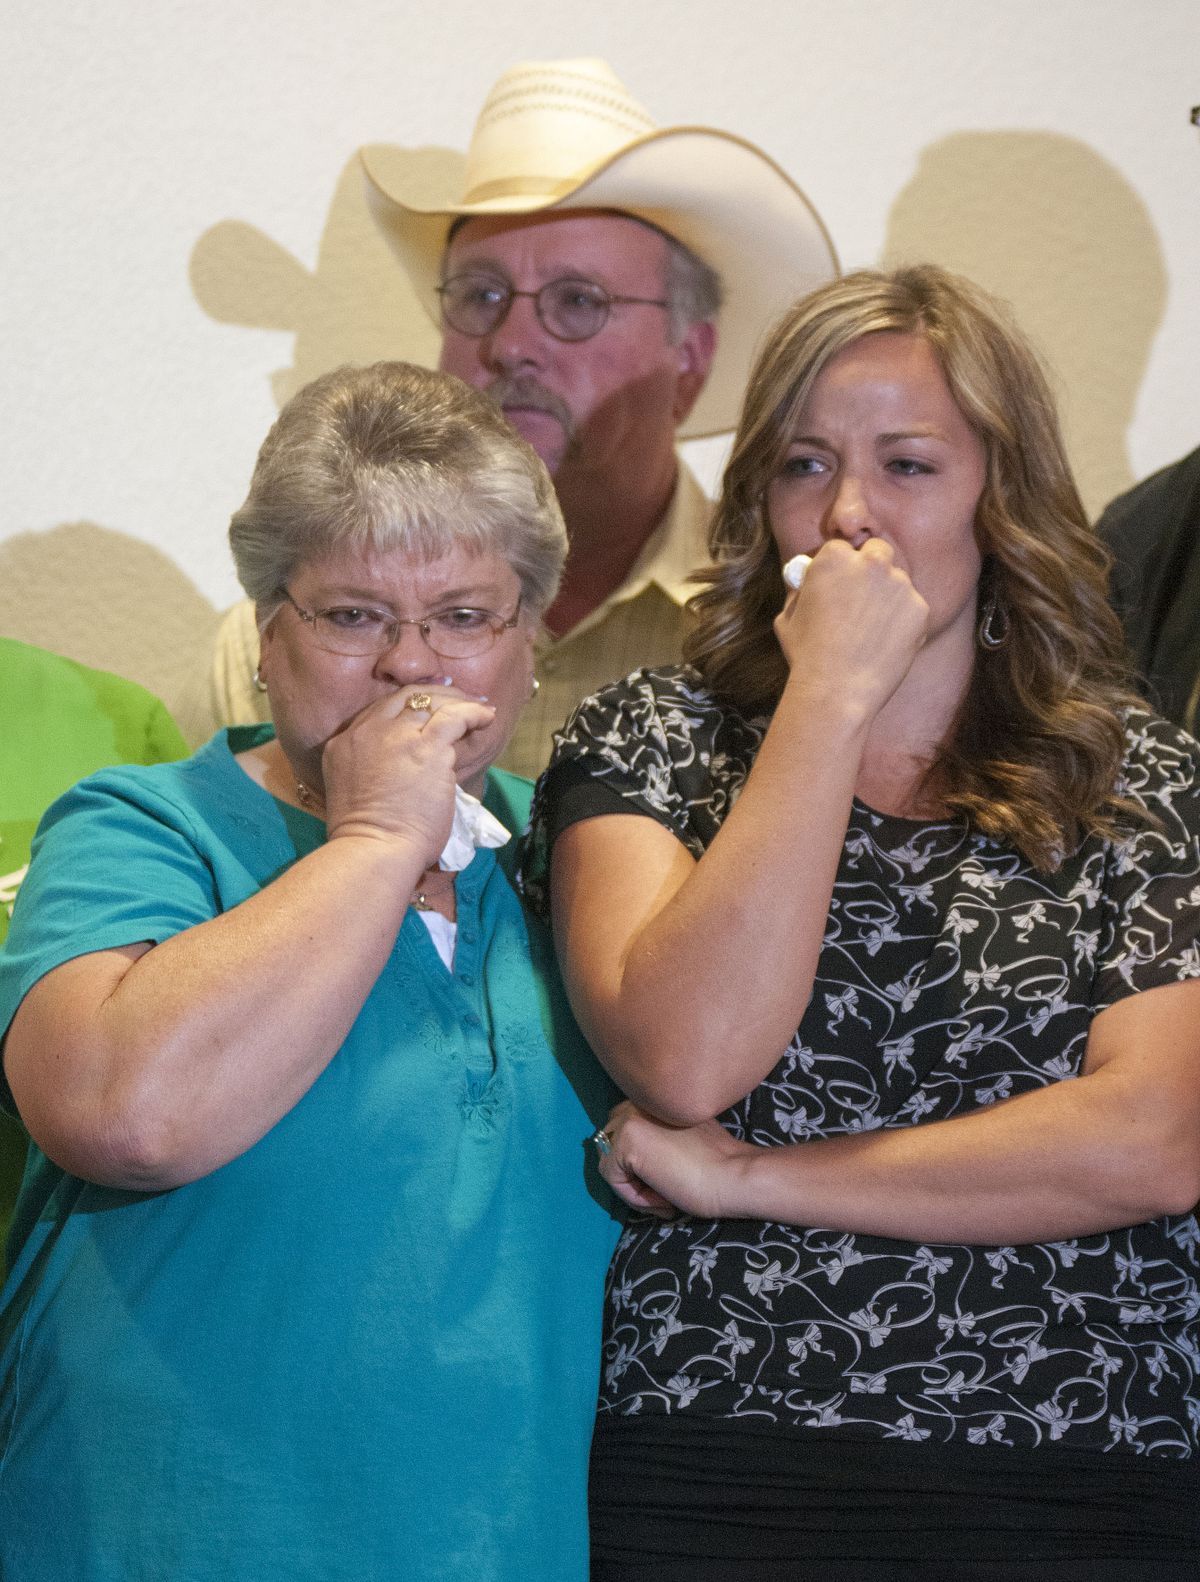 Christy Ivie, right, the wife of slain Border Patrol agent Nicolas Ivie, holds back tears as she stands with her father, Tracy Morris and  her mother DeAnn Morris, at a  news conference  Thursday, Oct. 4 , 2012,  at the Cochise College in Sierra Vista, Ariz. Nicholas Ivie was gunned down Tuesday, Oct 2, as he responded to a tripped sensor on the USA side of the border fence, near the small border town of Naco, Ariz. Ivie